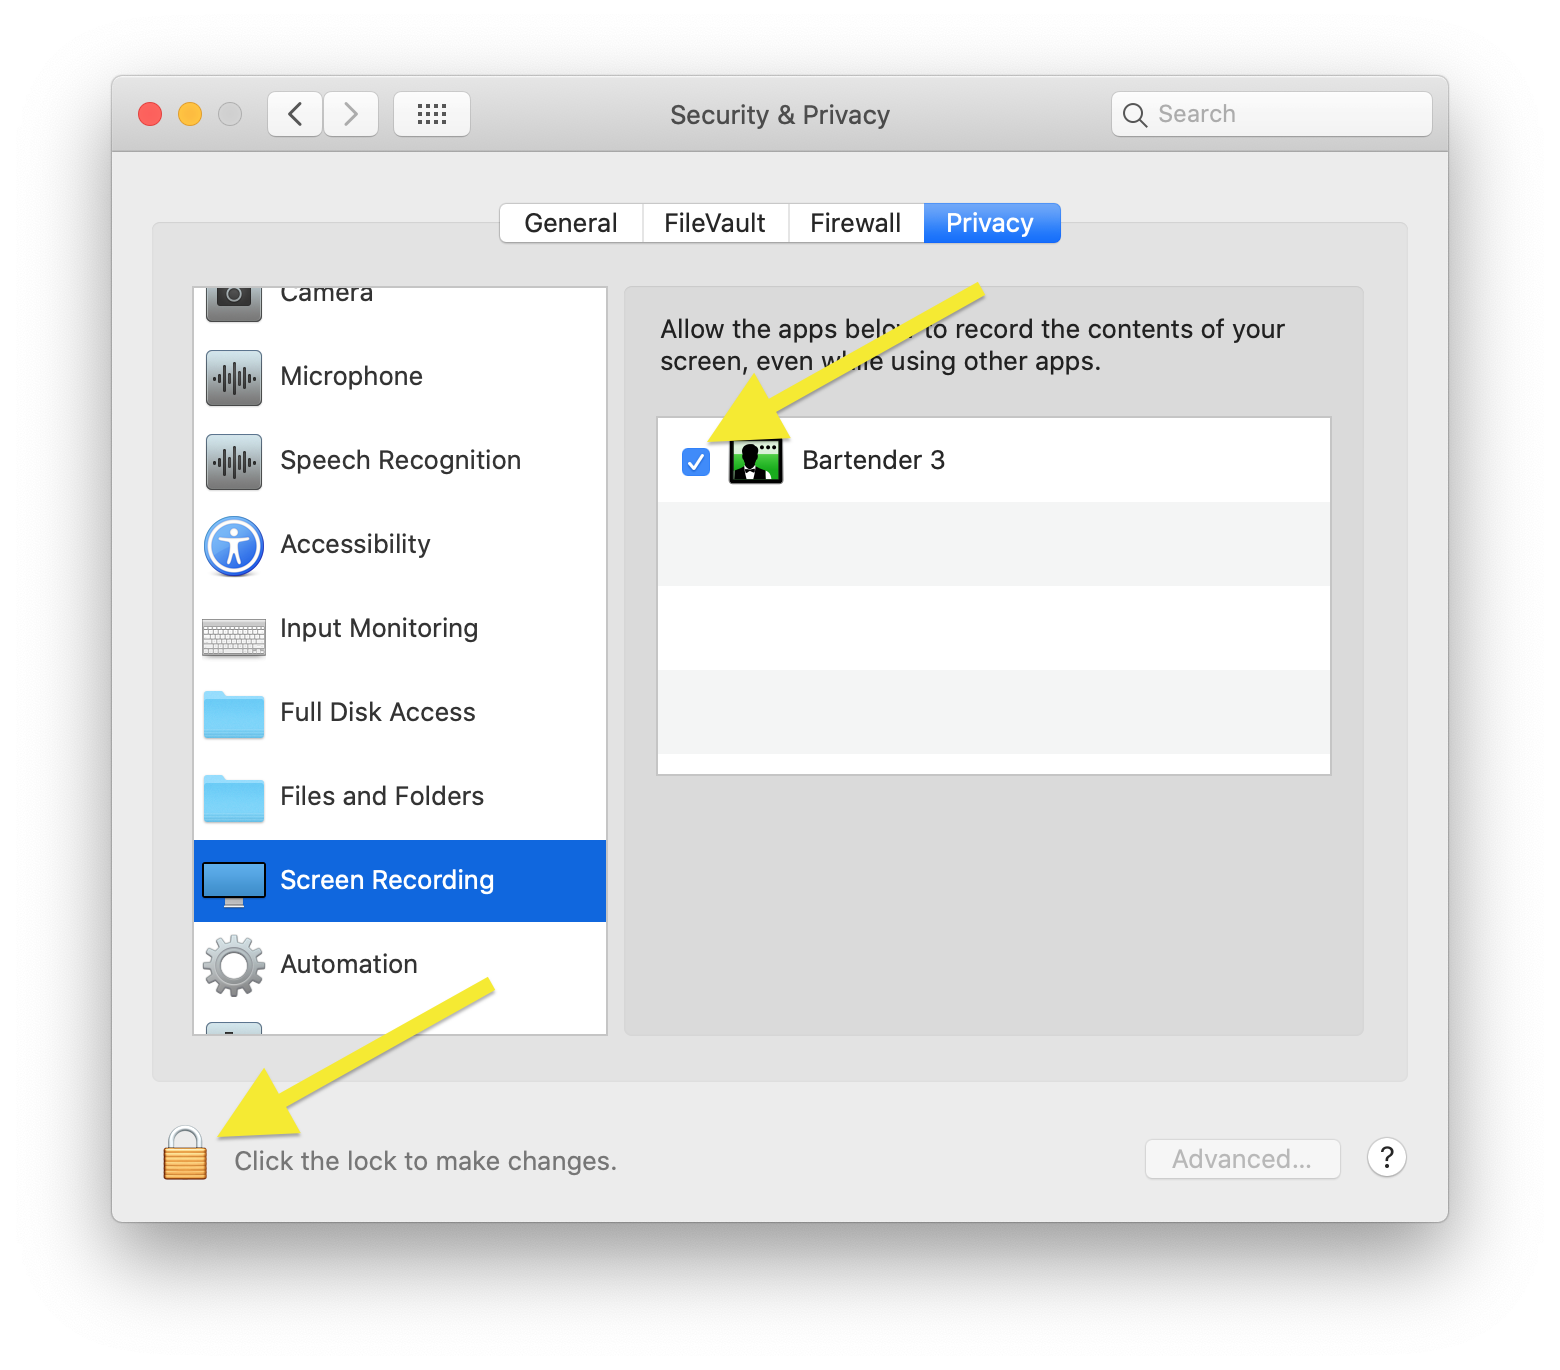 how to screen recording on macbook